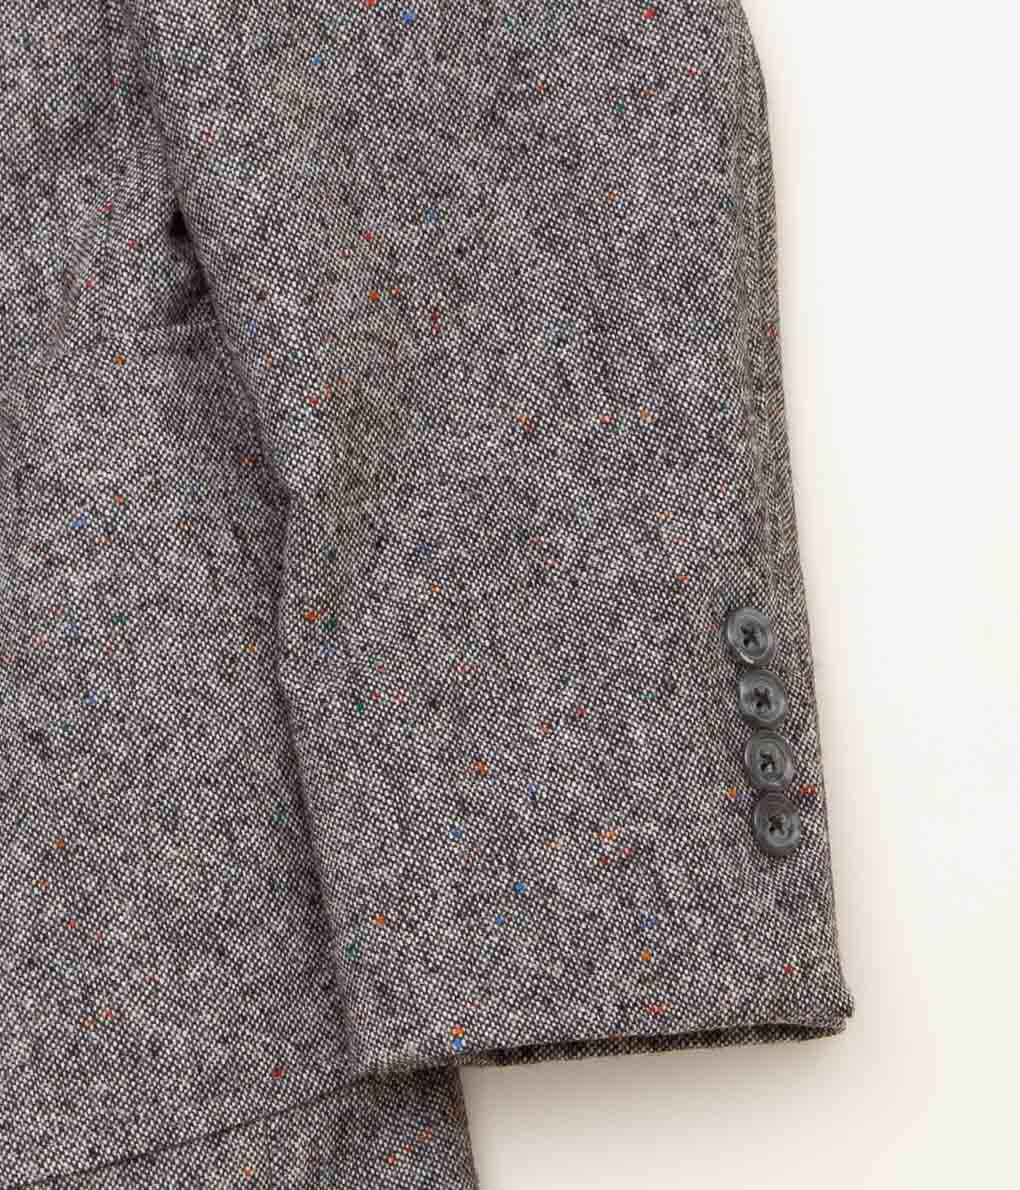 INDIVIDUALIZED CLOTHING "DONEGAL TWEED SPORTCOAT" (GRAY)